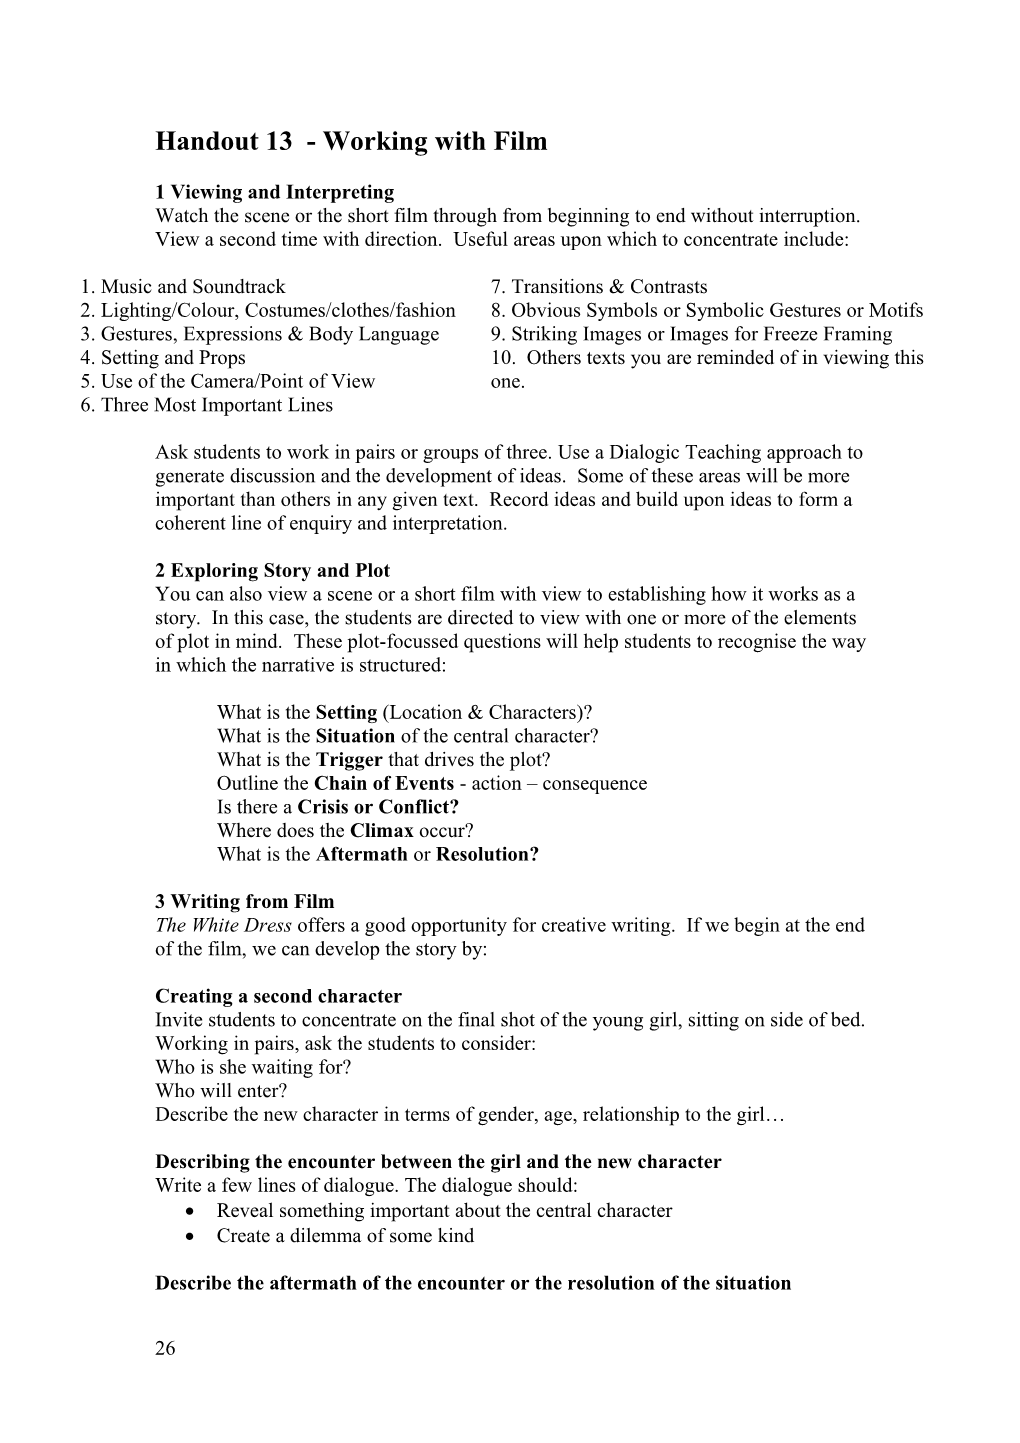 Handout 13 - Working with Film